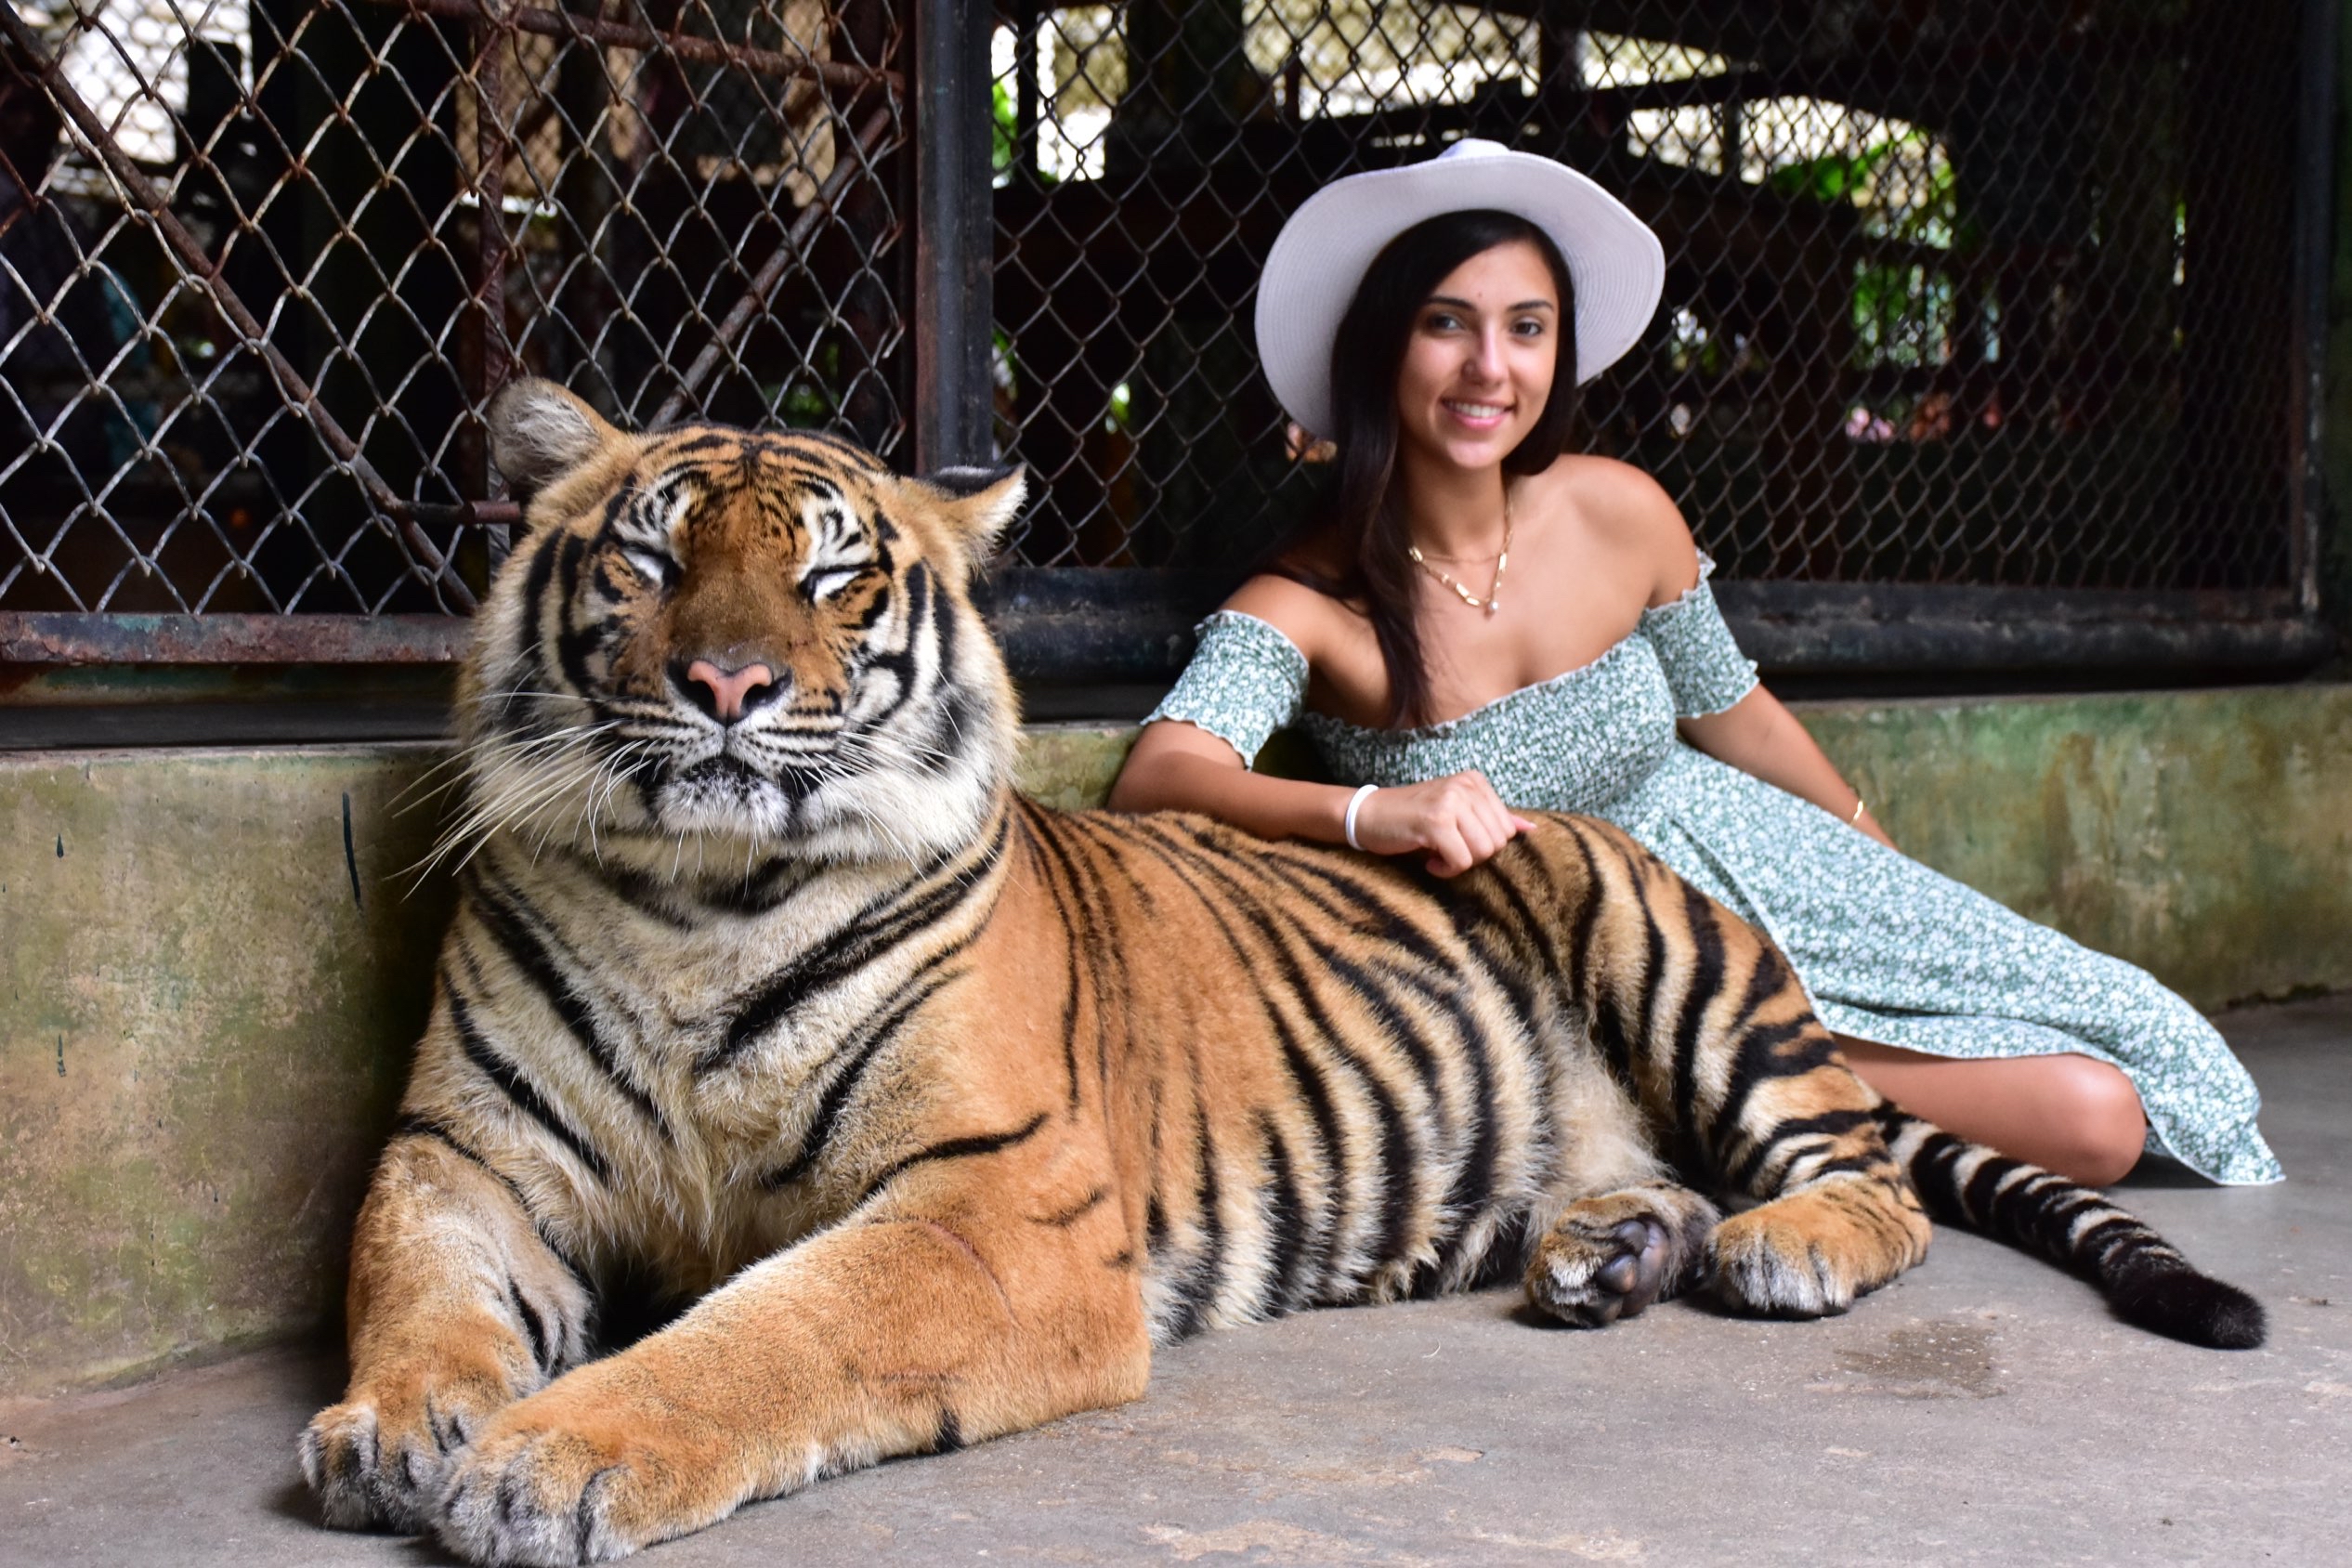 Tiger Kingdom - Phuket attraction reviews - Tiger Kingdom - Phuket tickets  - Tiger Kingdom - Phuket discounts - Tiger Kingdom - Phuket transportation,  address, opening hours - attractions, hotels, and food near Tiger Kingdom -  Phuket 